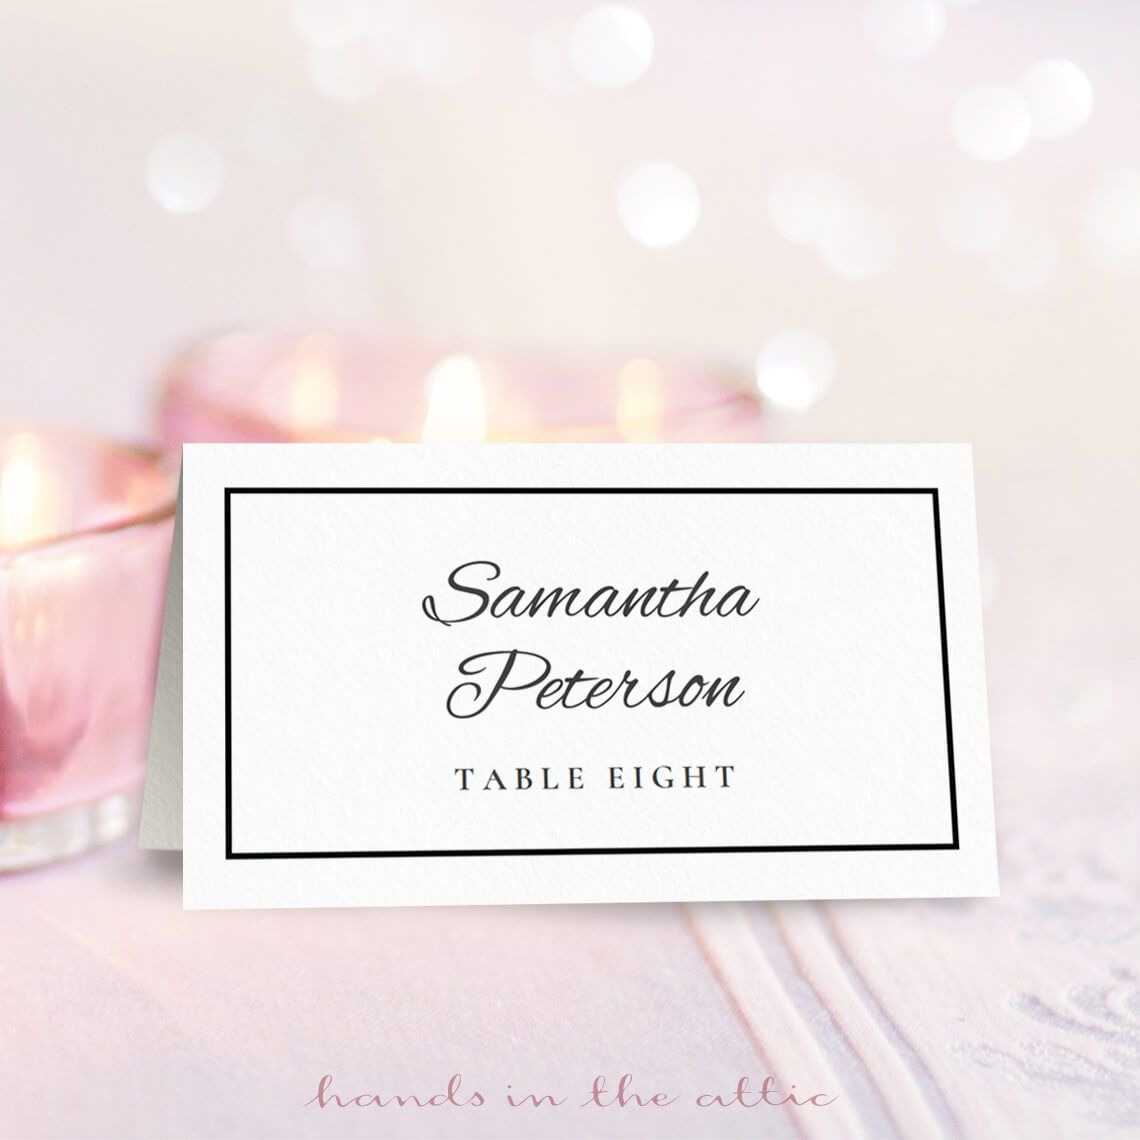 Wedding Place Card Template | Free On Handsintheattic With Regard To Paper Source Templates Place Cards